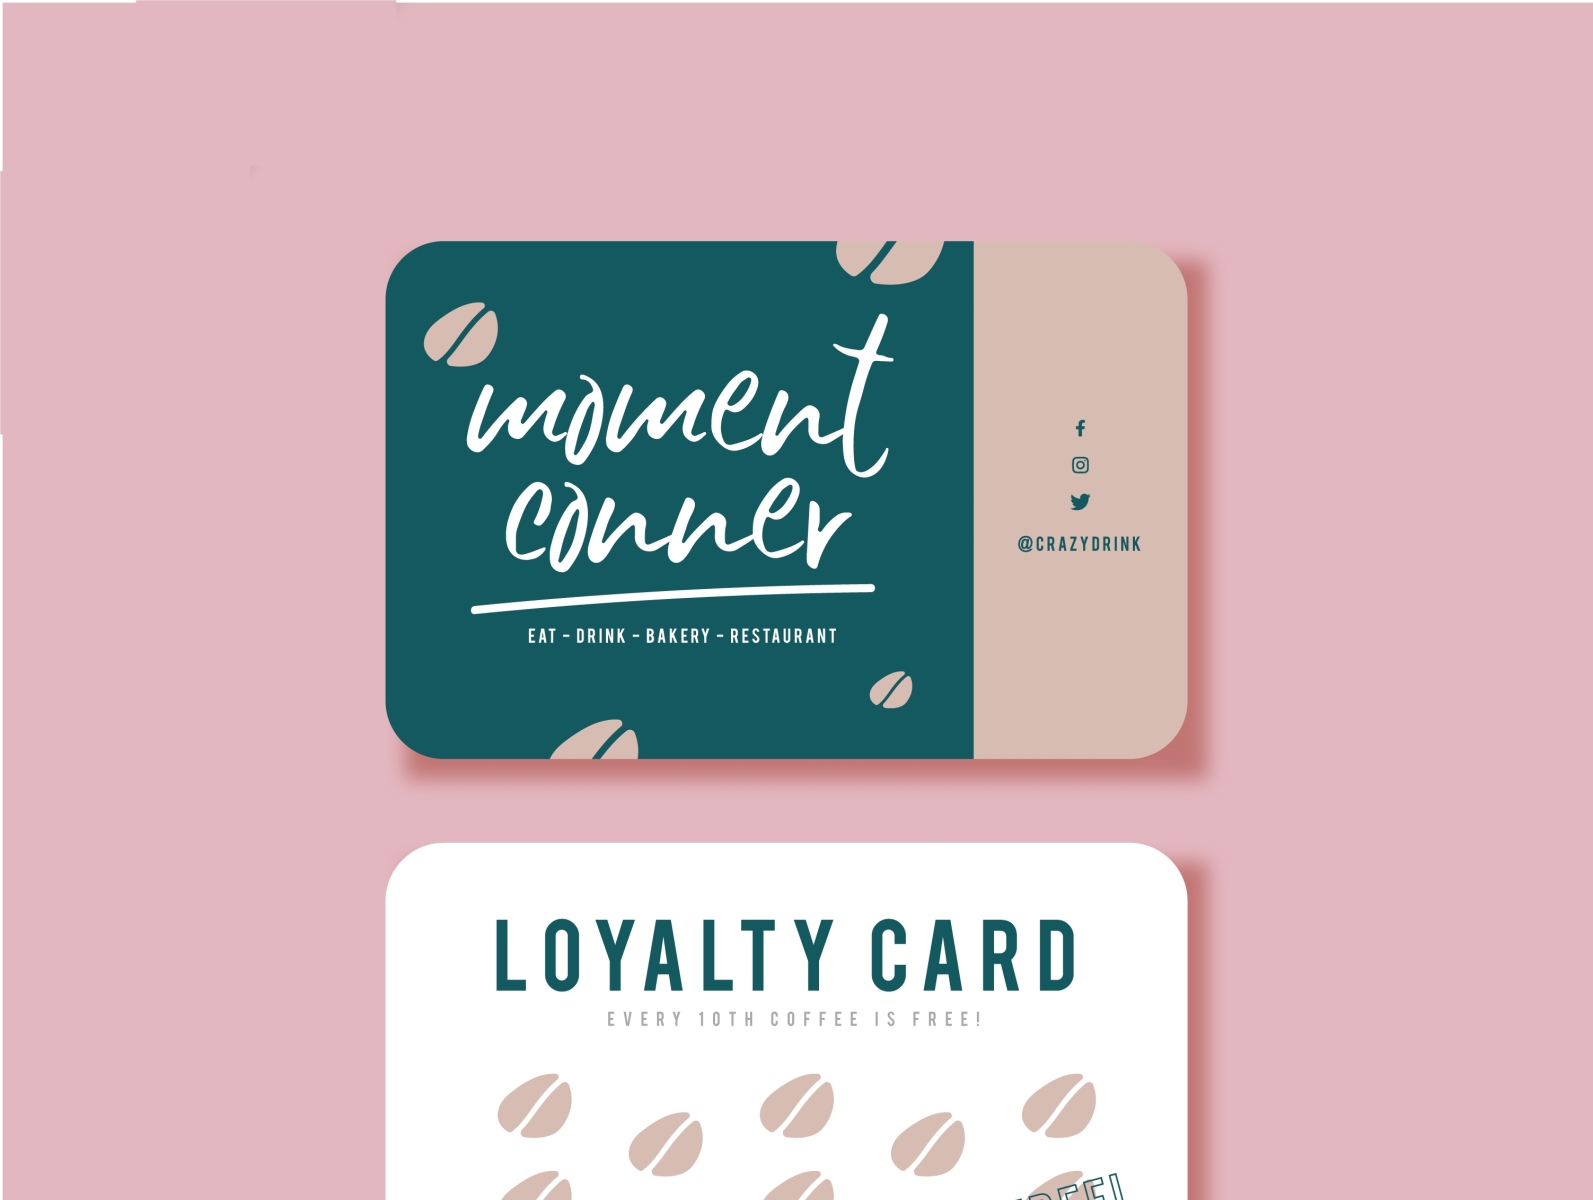 cheapest-loyalty-cards-online-by-clara-james-on-dribbble